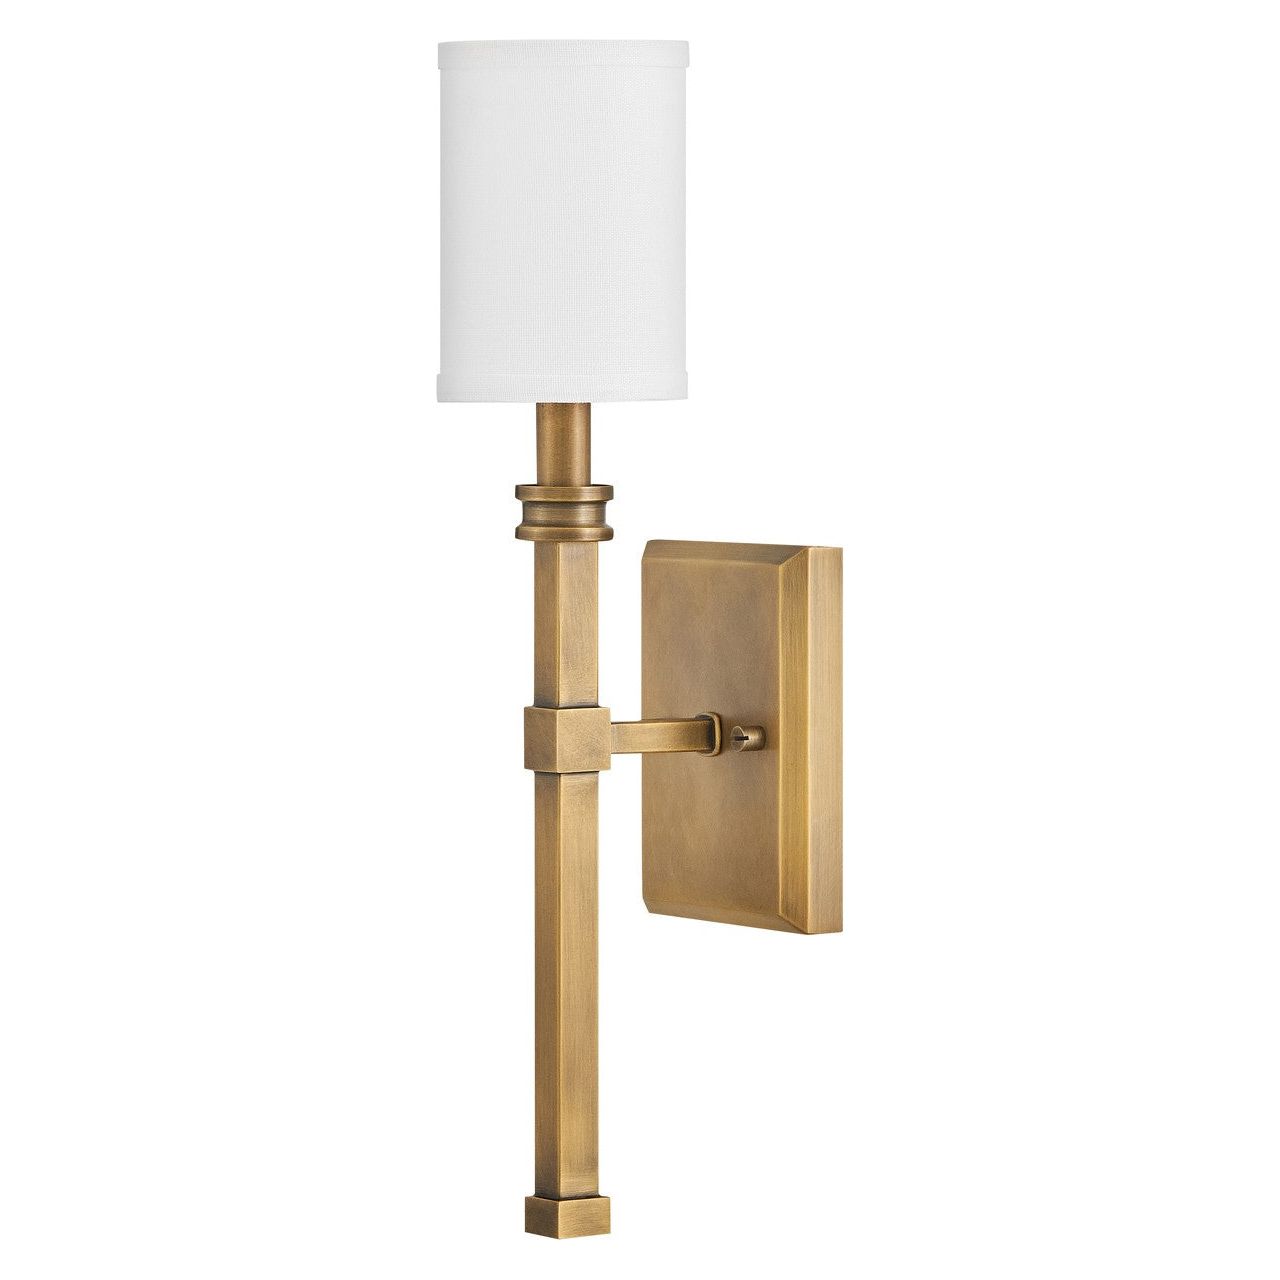 Hinkley Canada - 46410HB - LED Wall Sconce - Moore - Heritage Brass